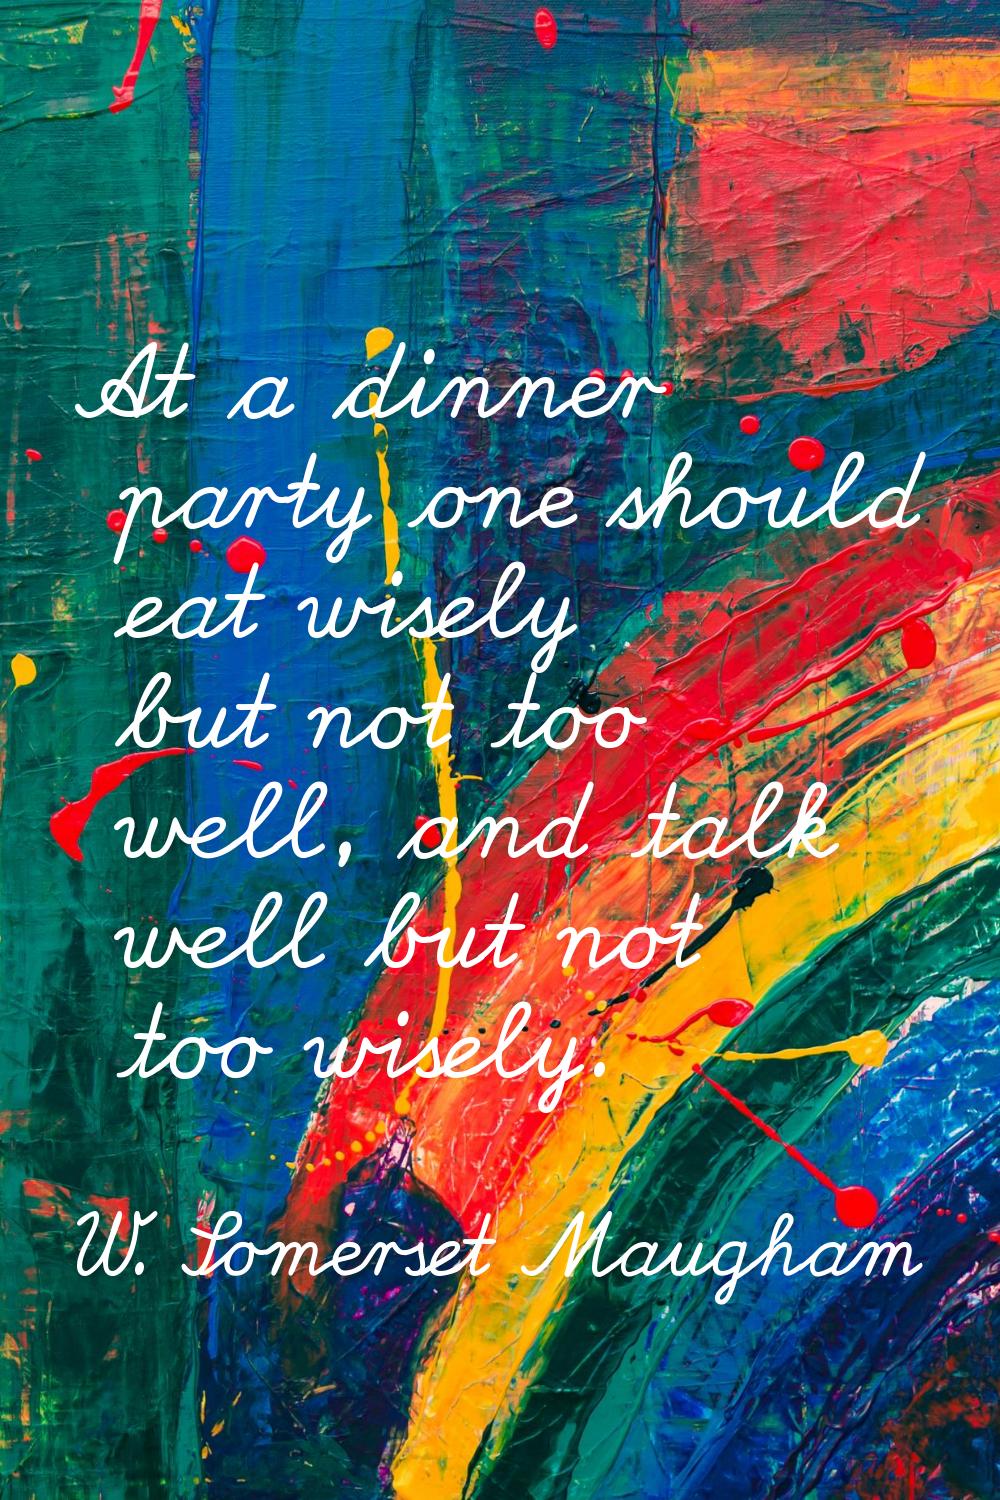 At a dinner party one should eat wisely but not too well, and talk well but not too wisely.